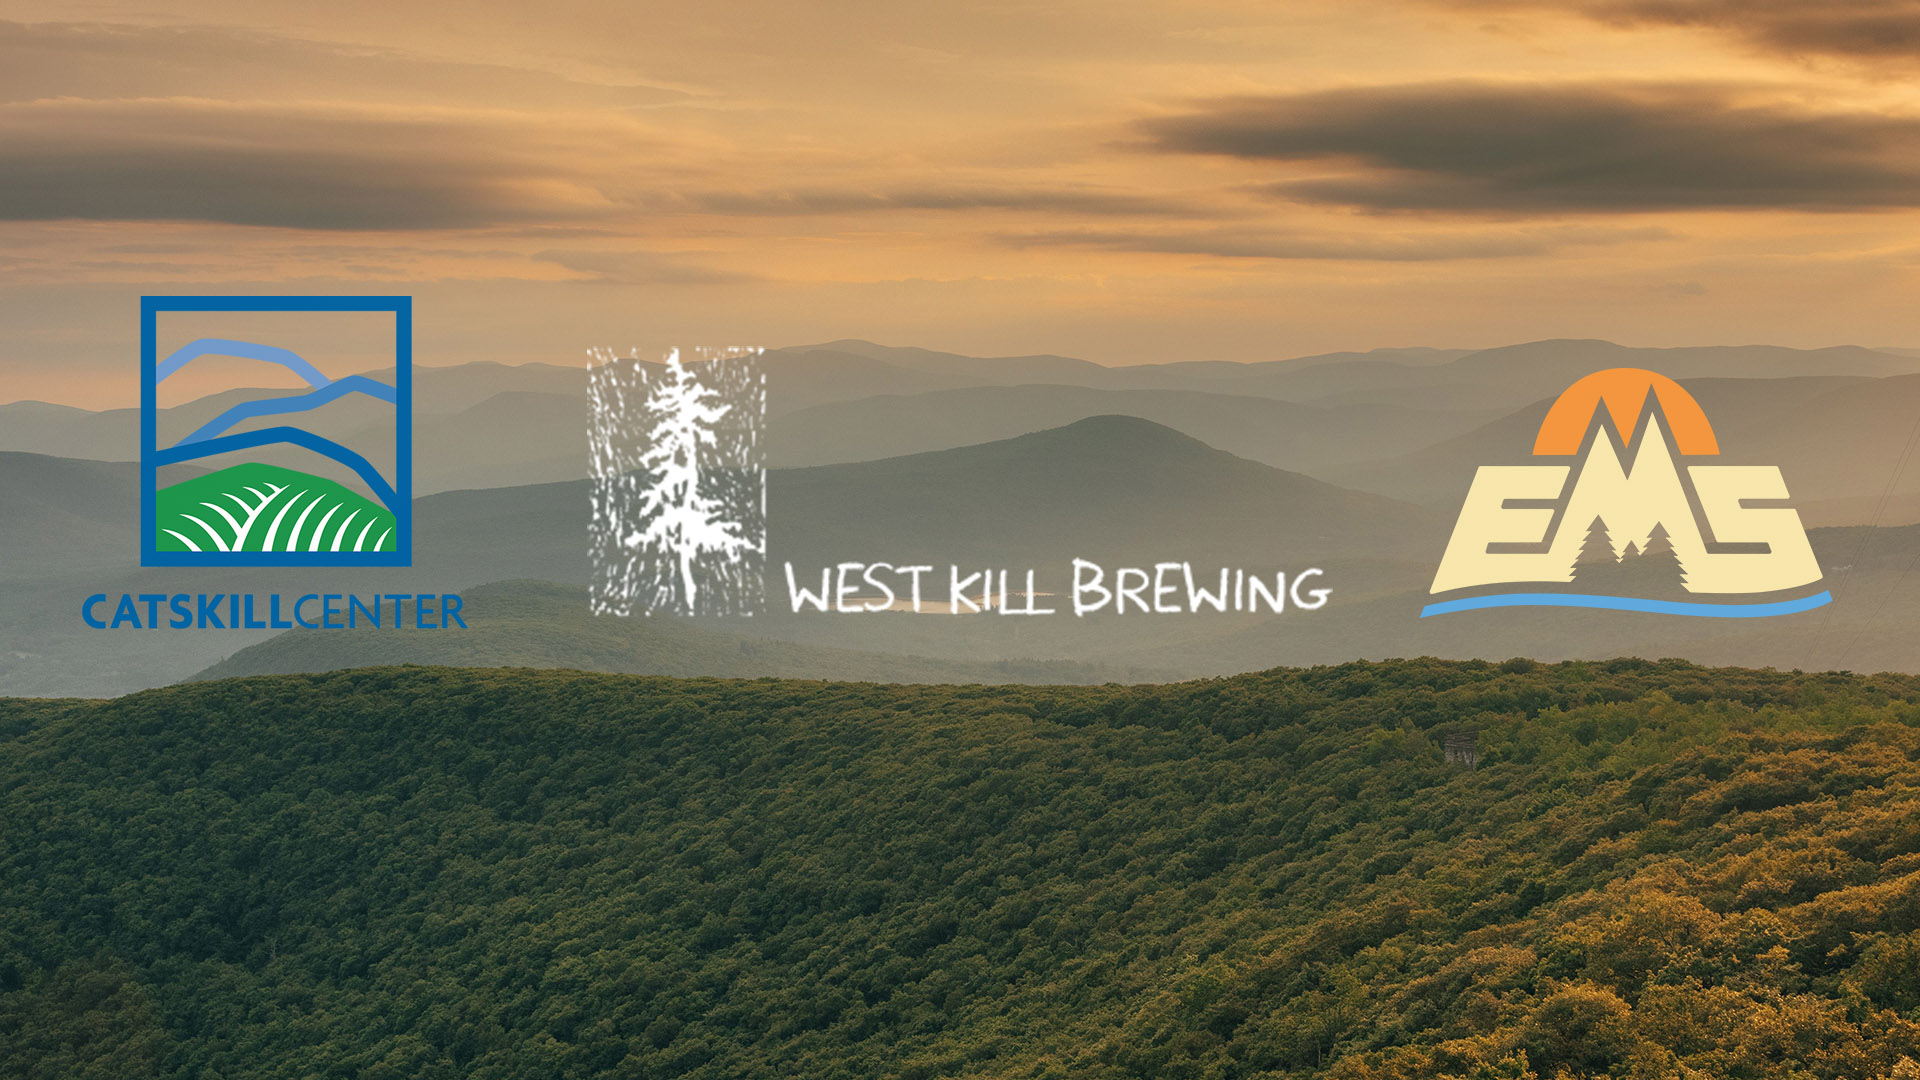 Eastern Mountain Sports West Kill Brewing to Partner For Catskills Center